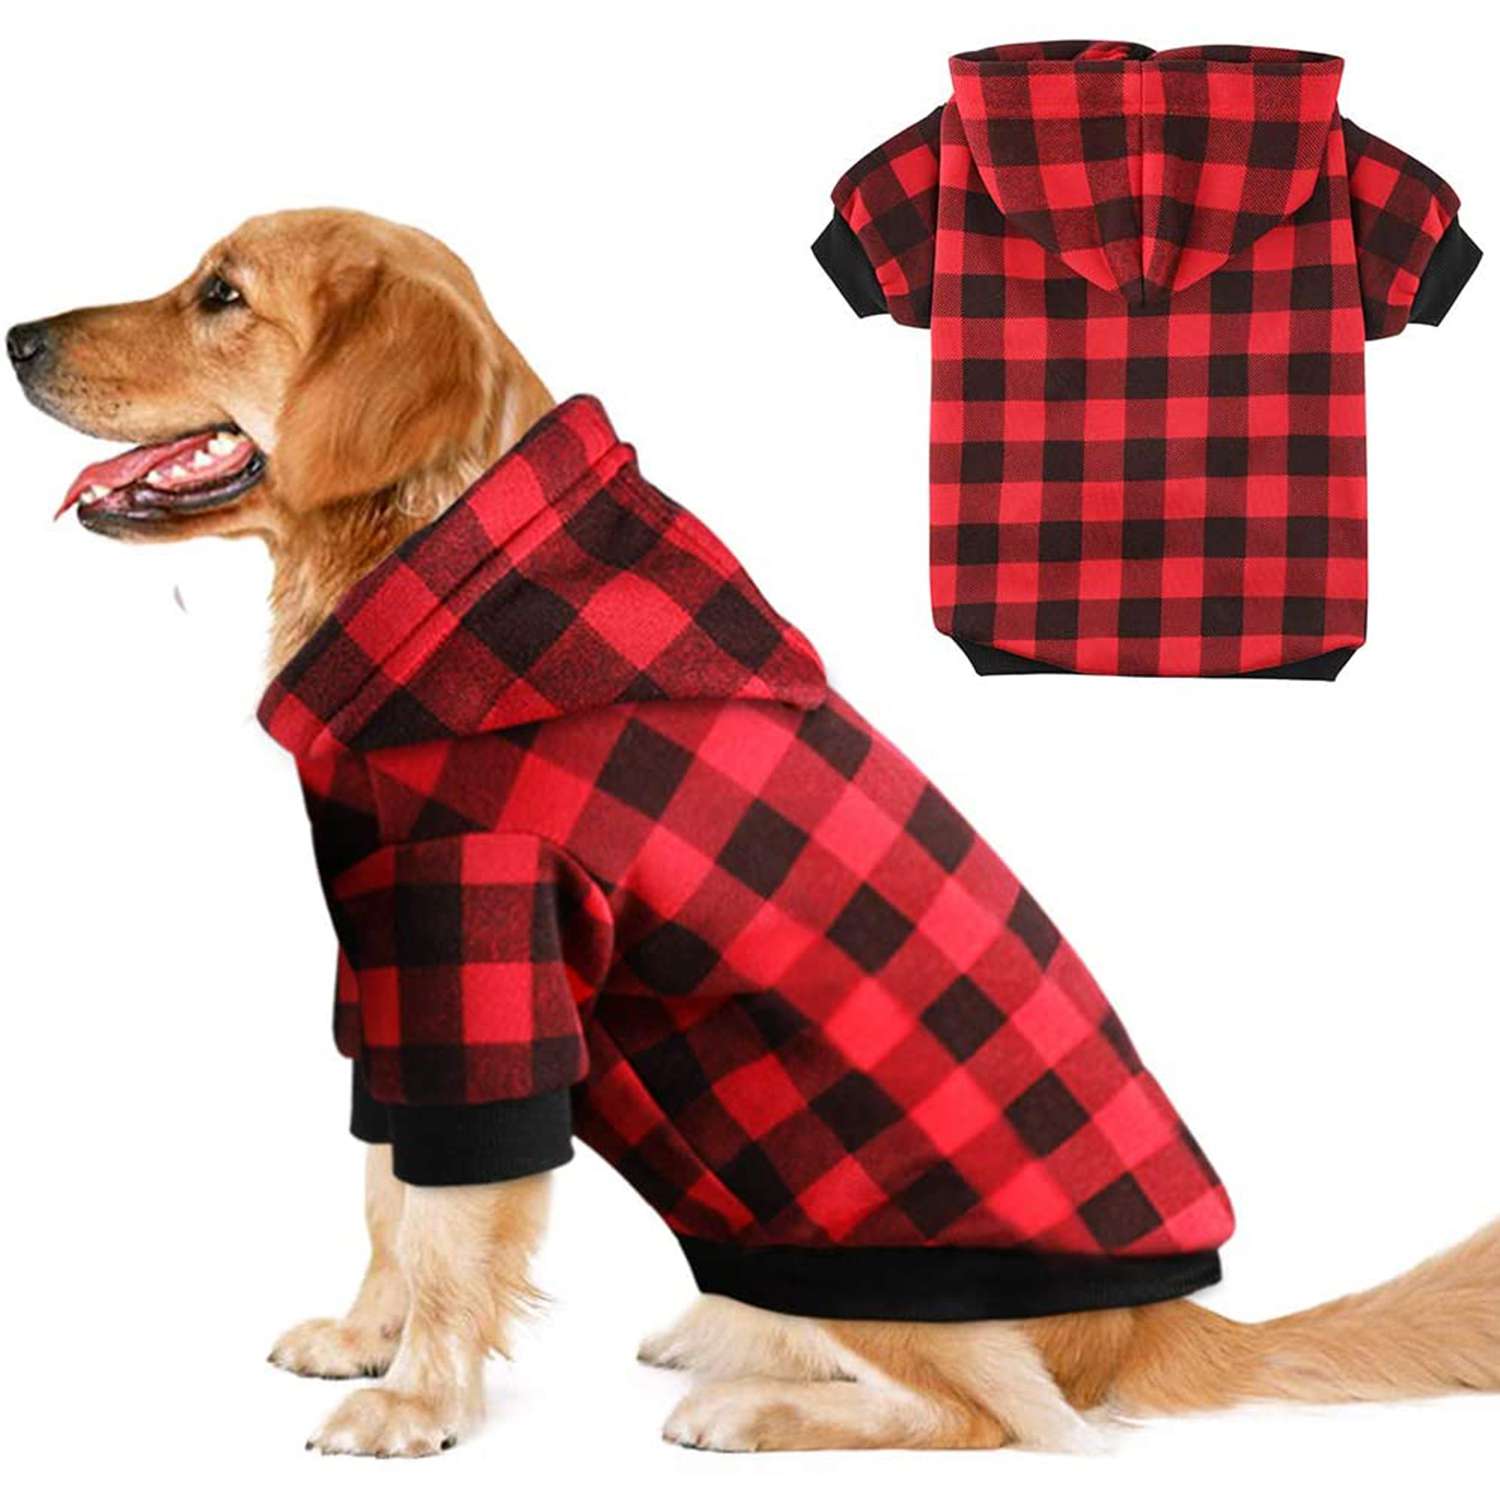 KOOLTAIL Plaid Dog Jumper Warm Dog Sweater Soft Winter Clothes for Dogs Puppy Pink